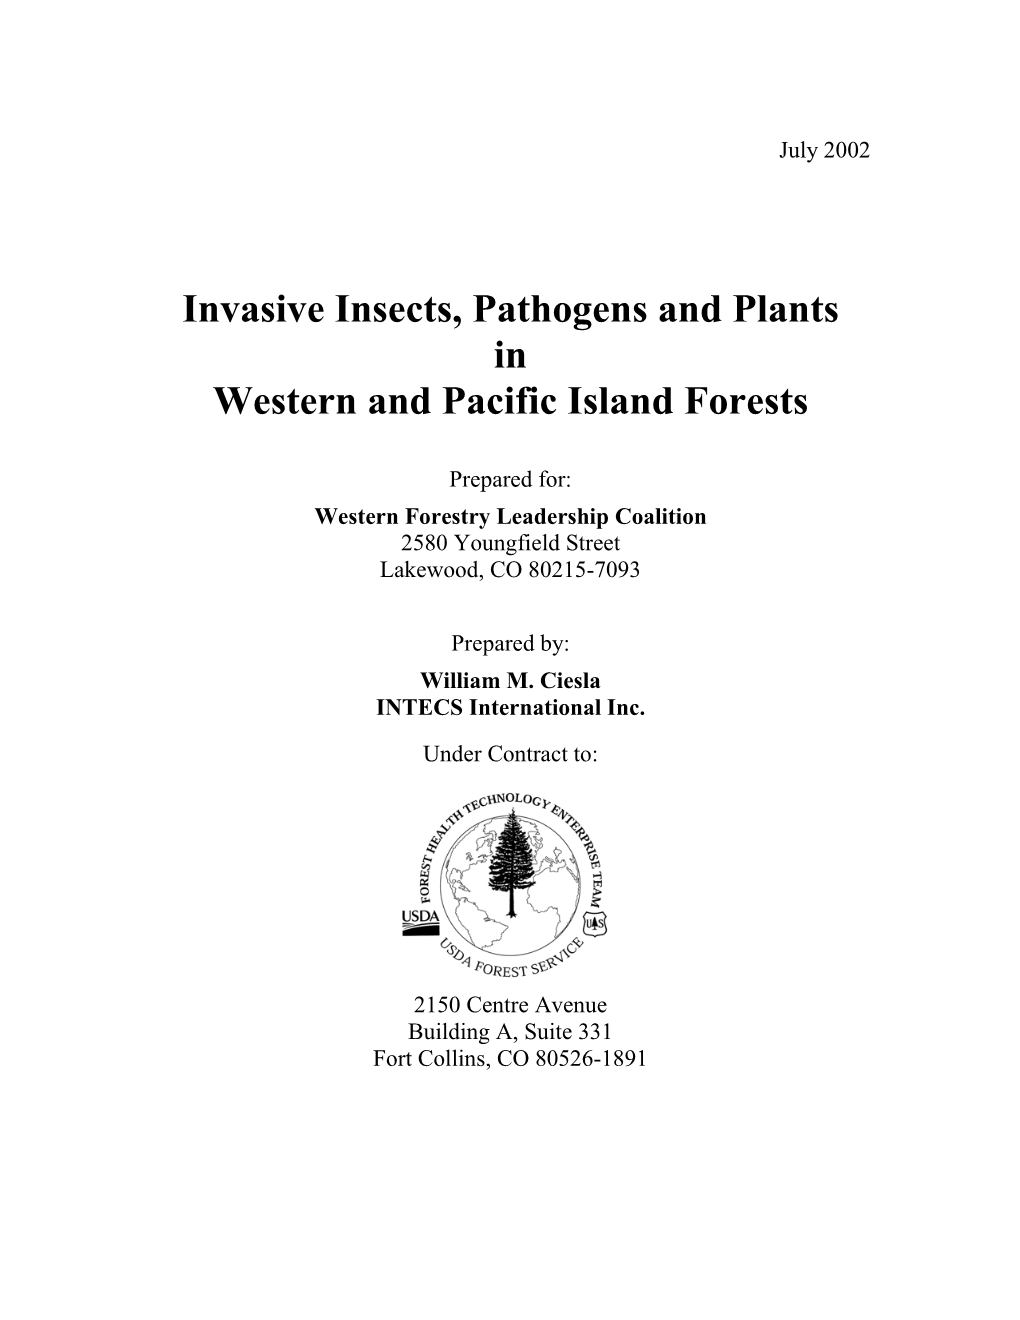 Invasive Insects, Pathogens and Plants in Western and Pacific Island Forests